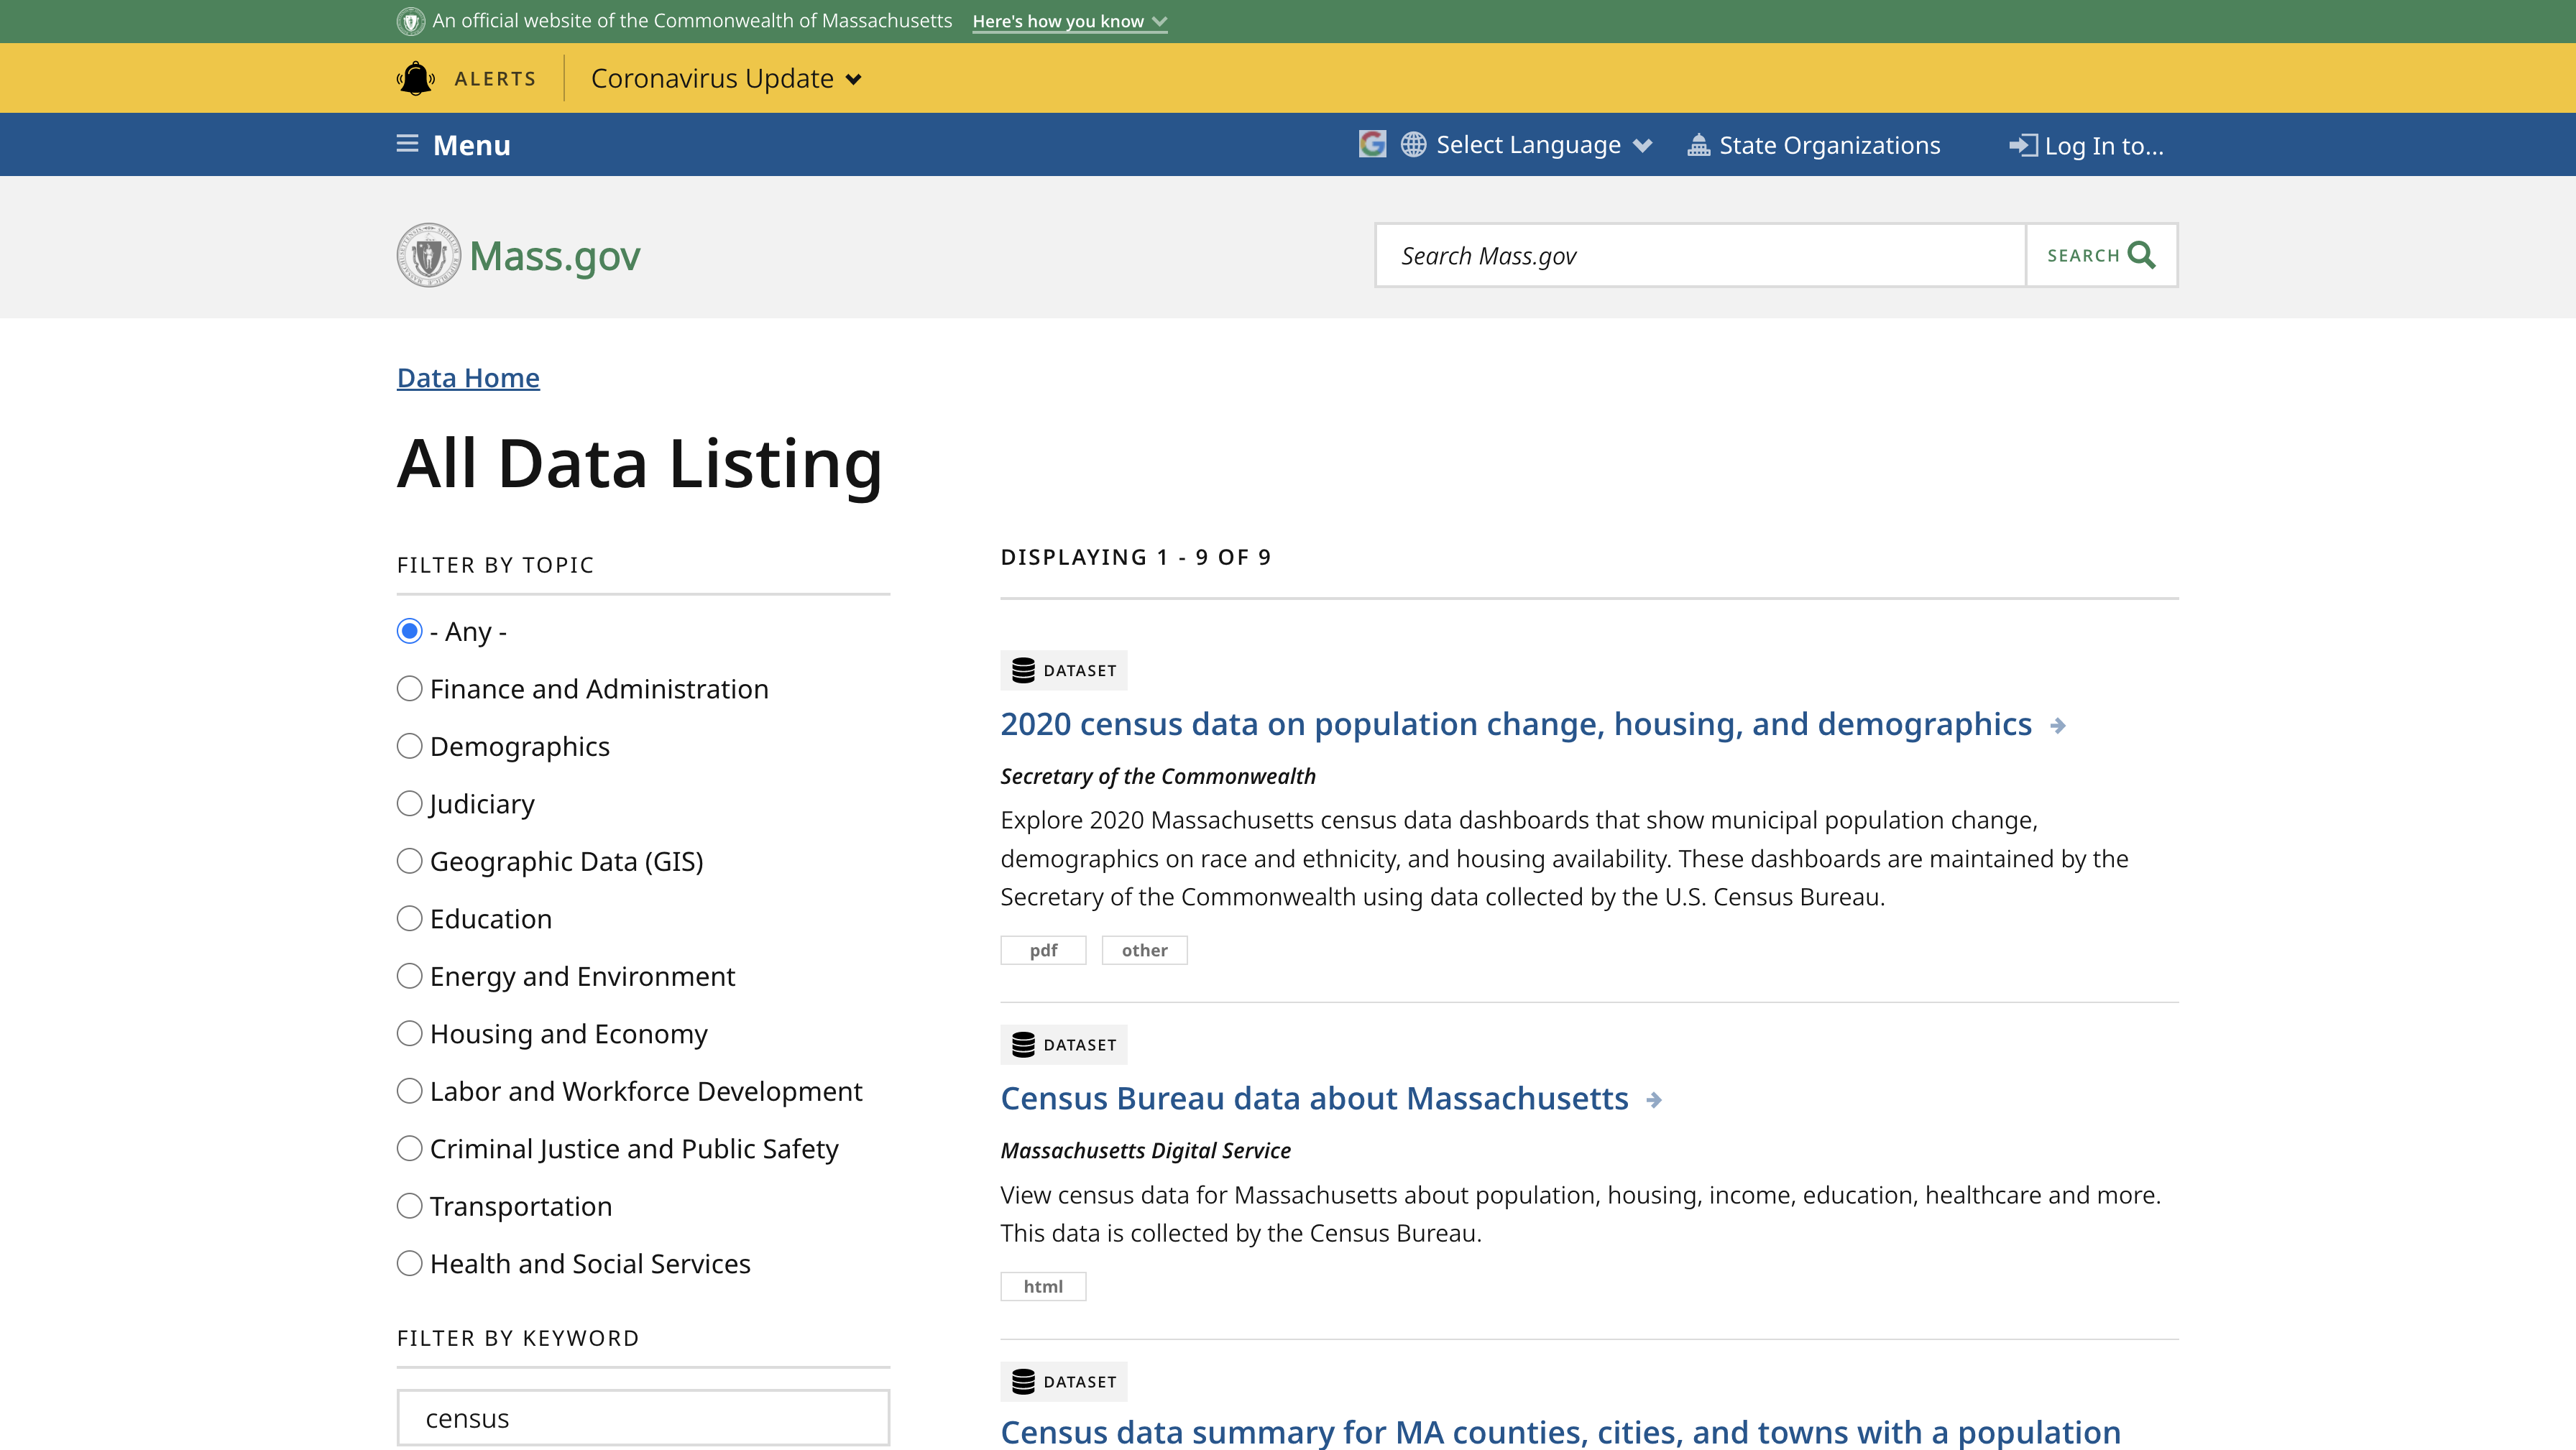 The first version of the Data Listing Results page.